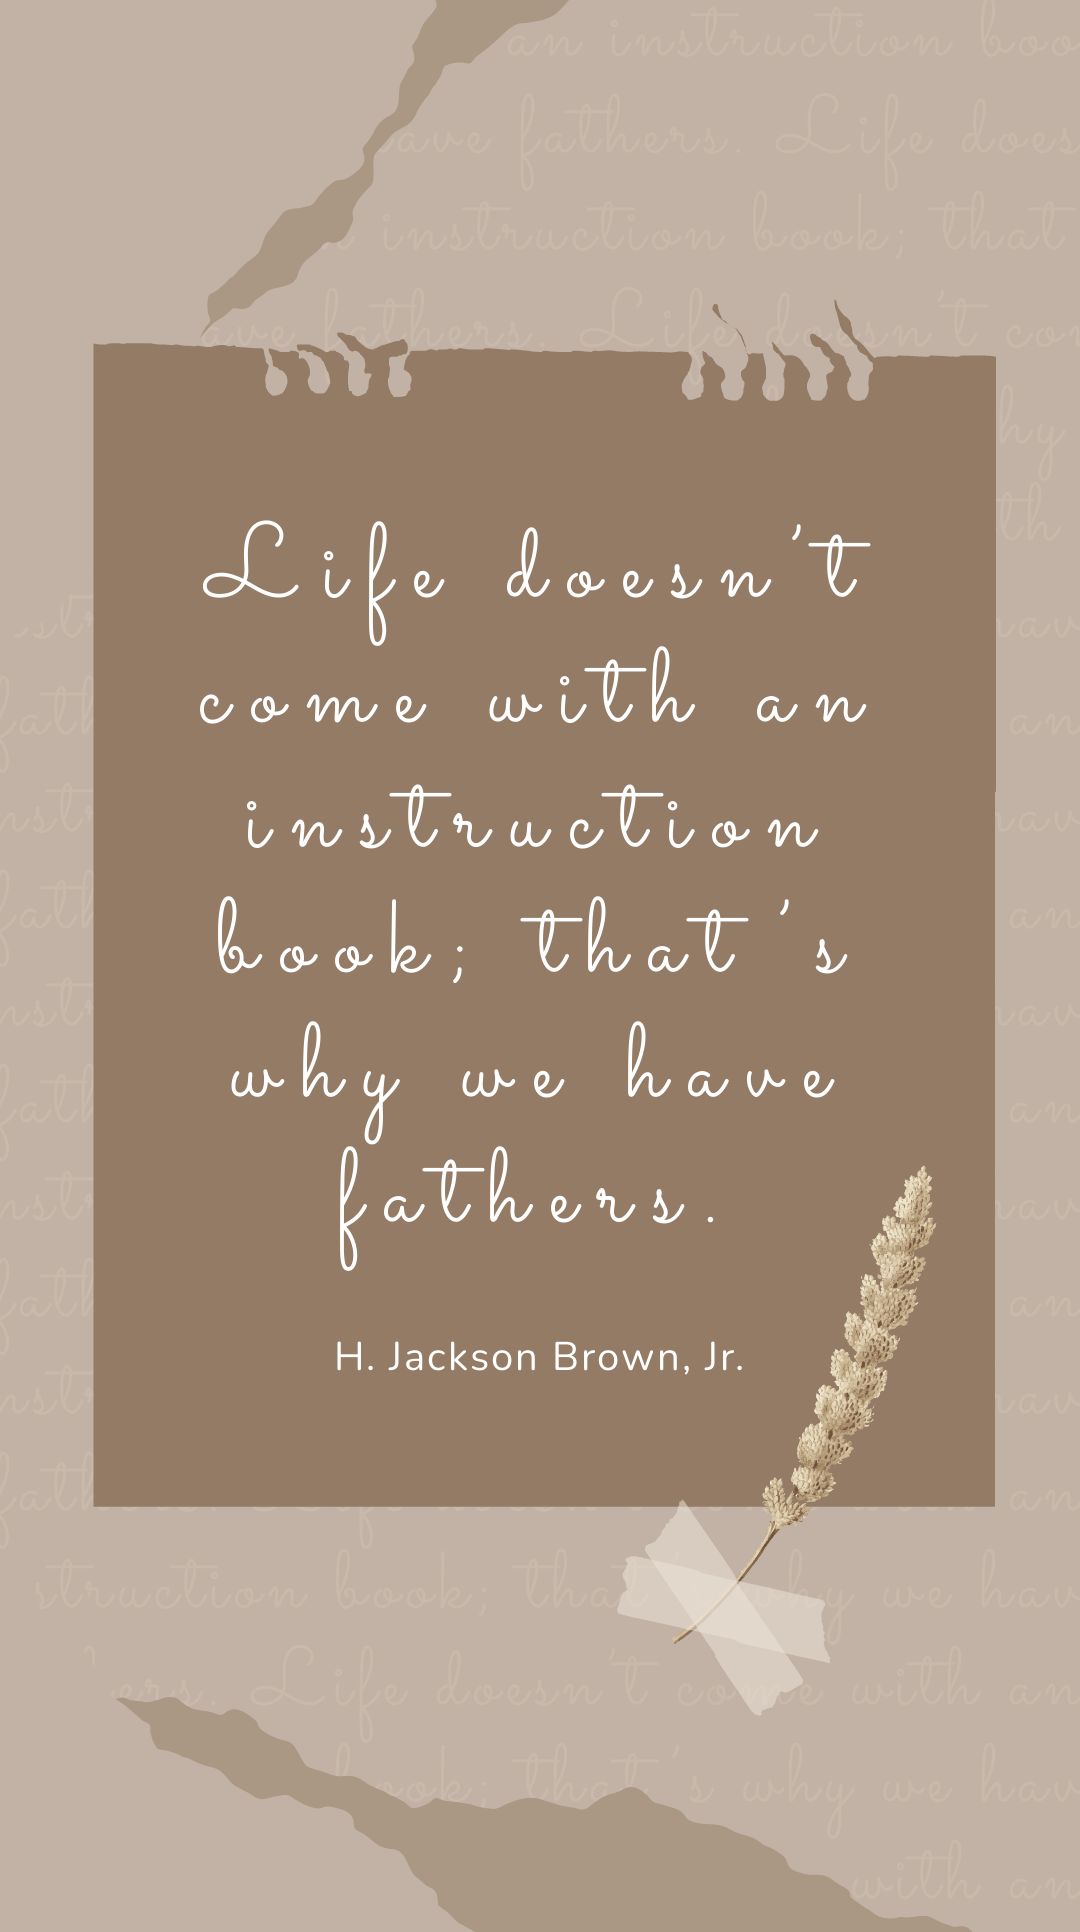 H. Jackson Brown, Jr. - Life doesn’t come with an instruction book; that’s why we have fathers.